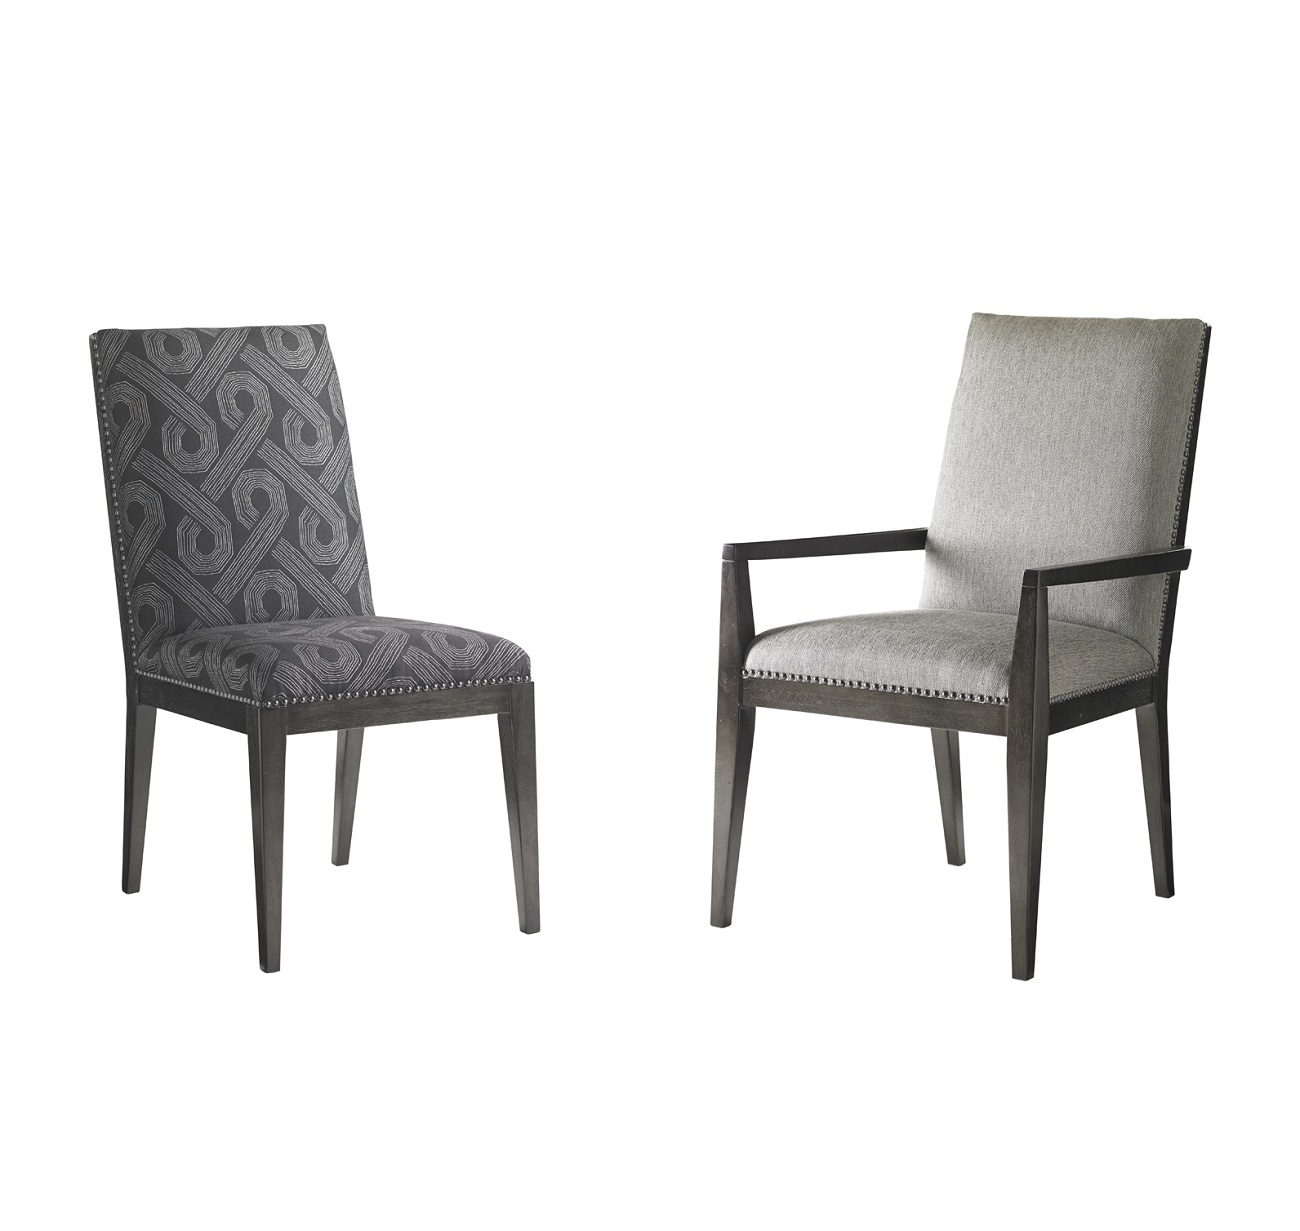 Carrera Vantage Dining Chair, Lexington Home Brands Upholstered Chairs